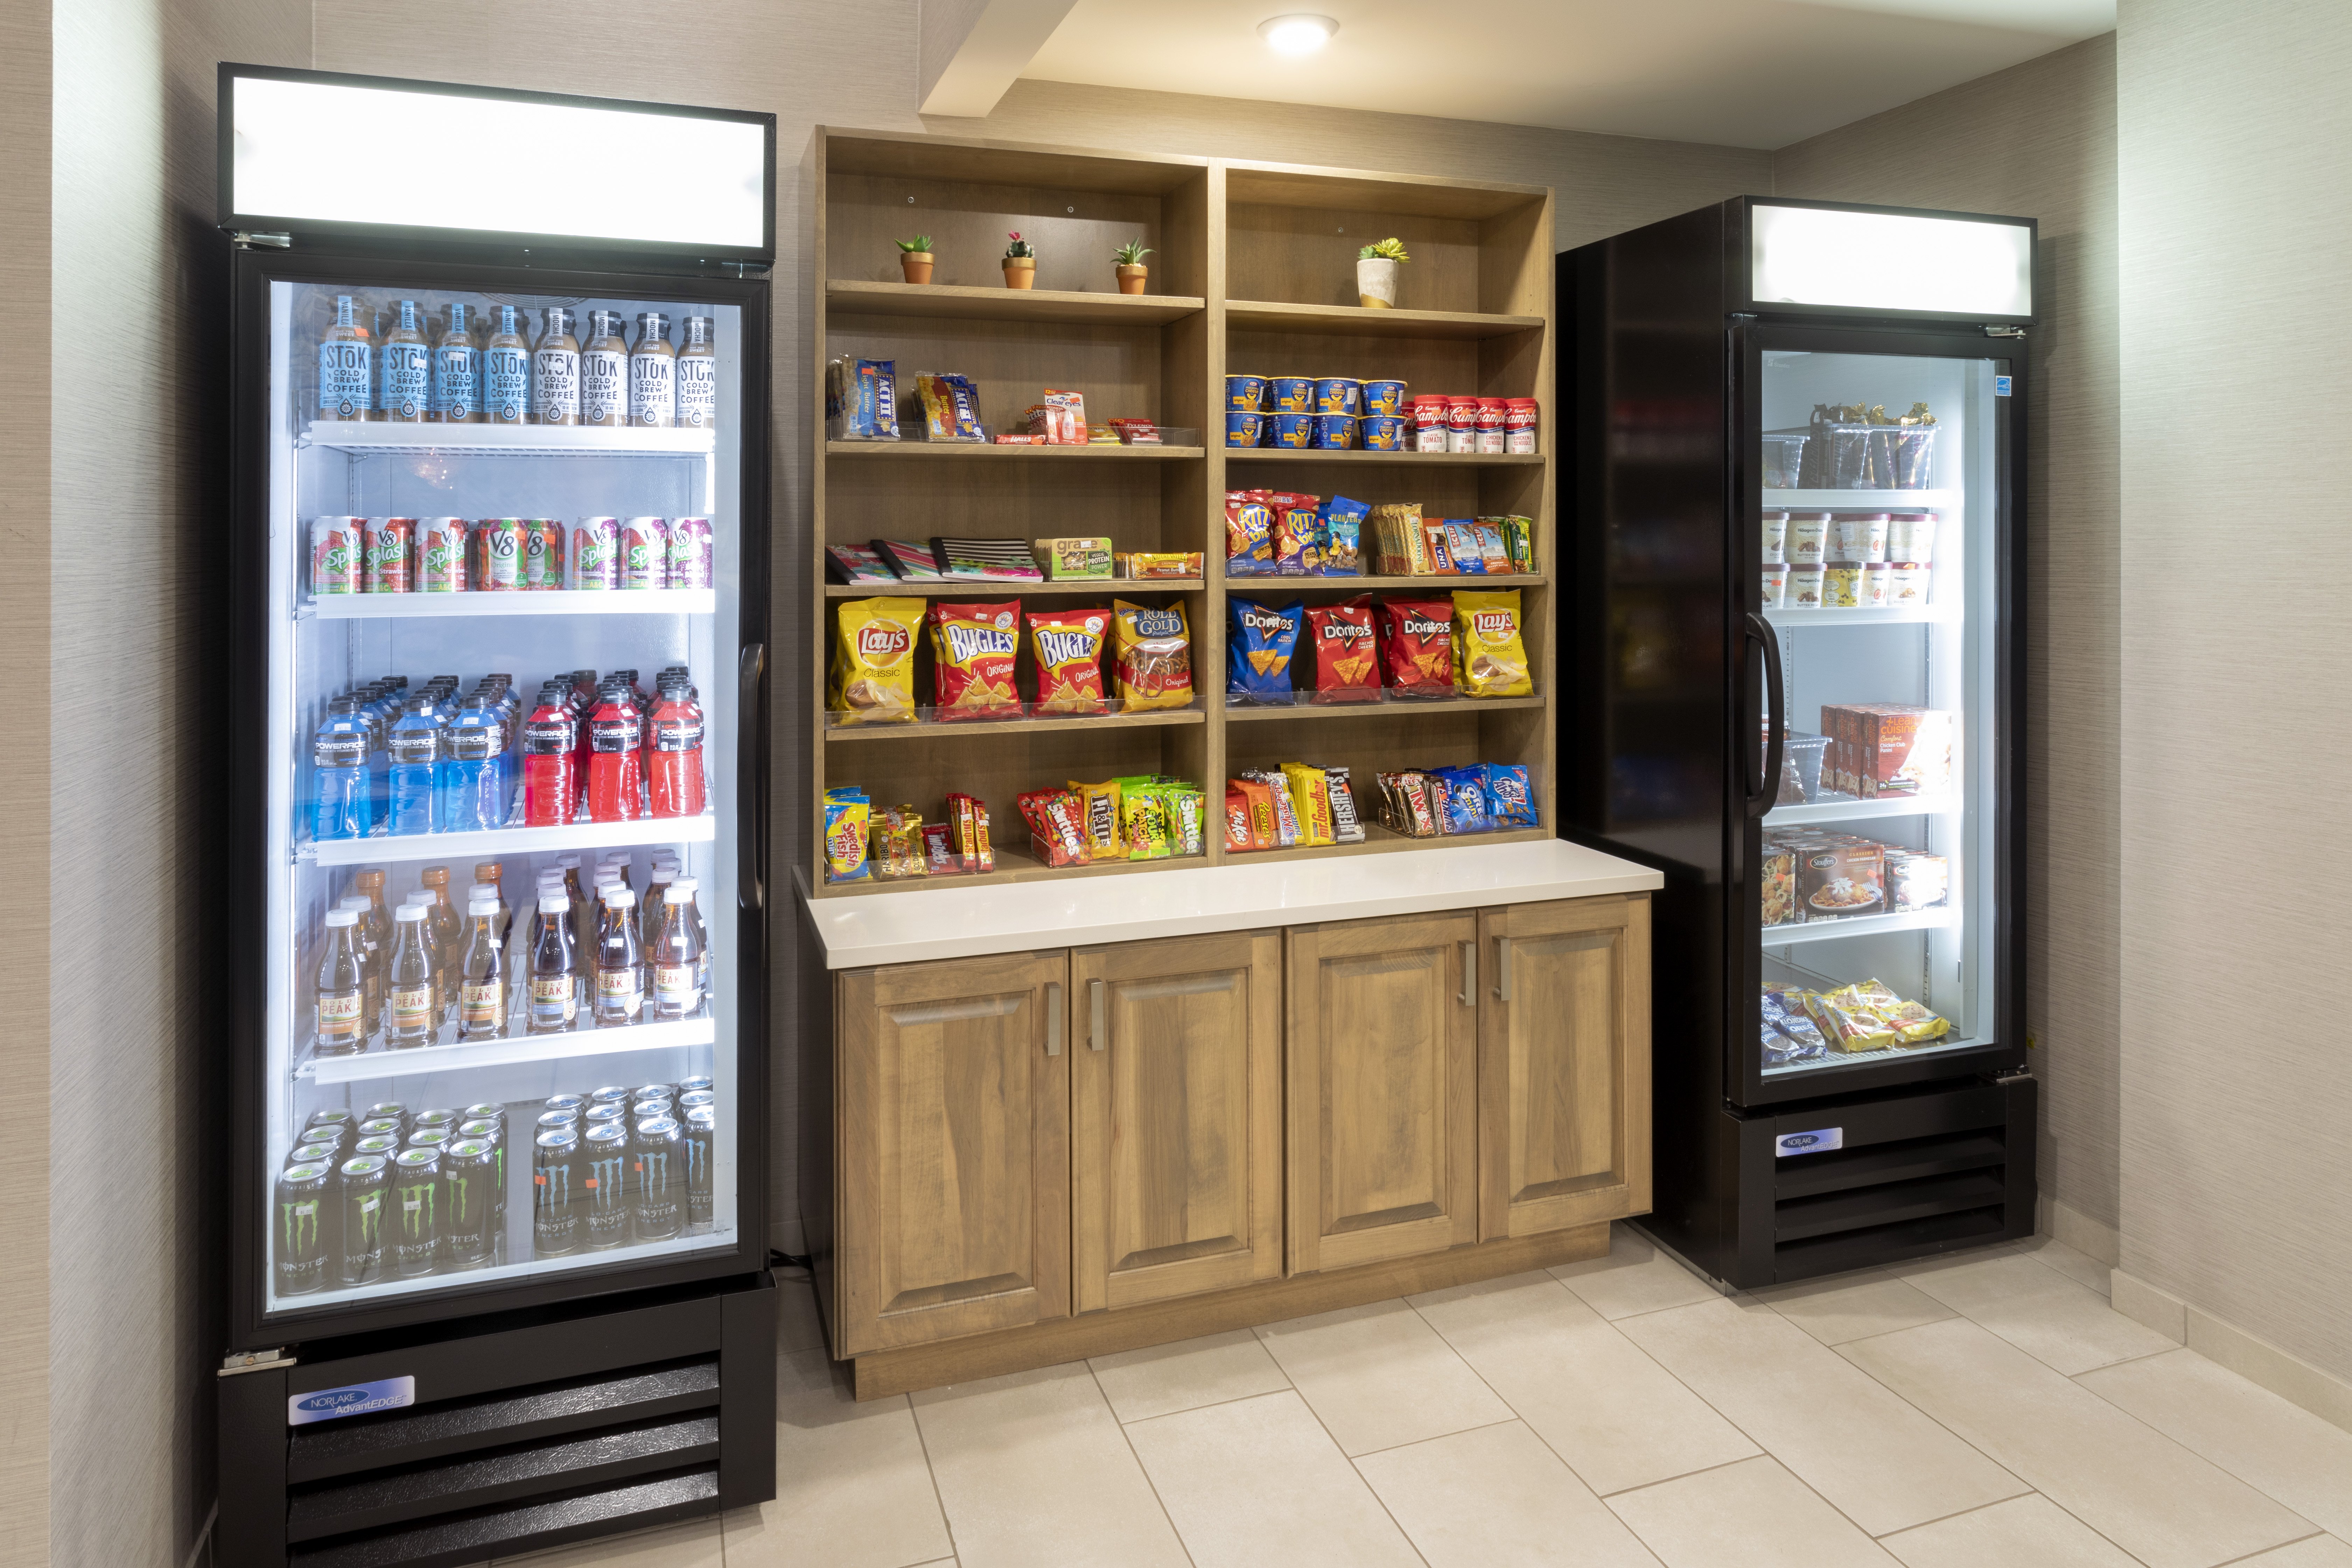 Our Sweet Shop features beverages, snacks, and ice cream